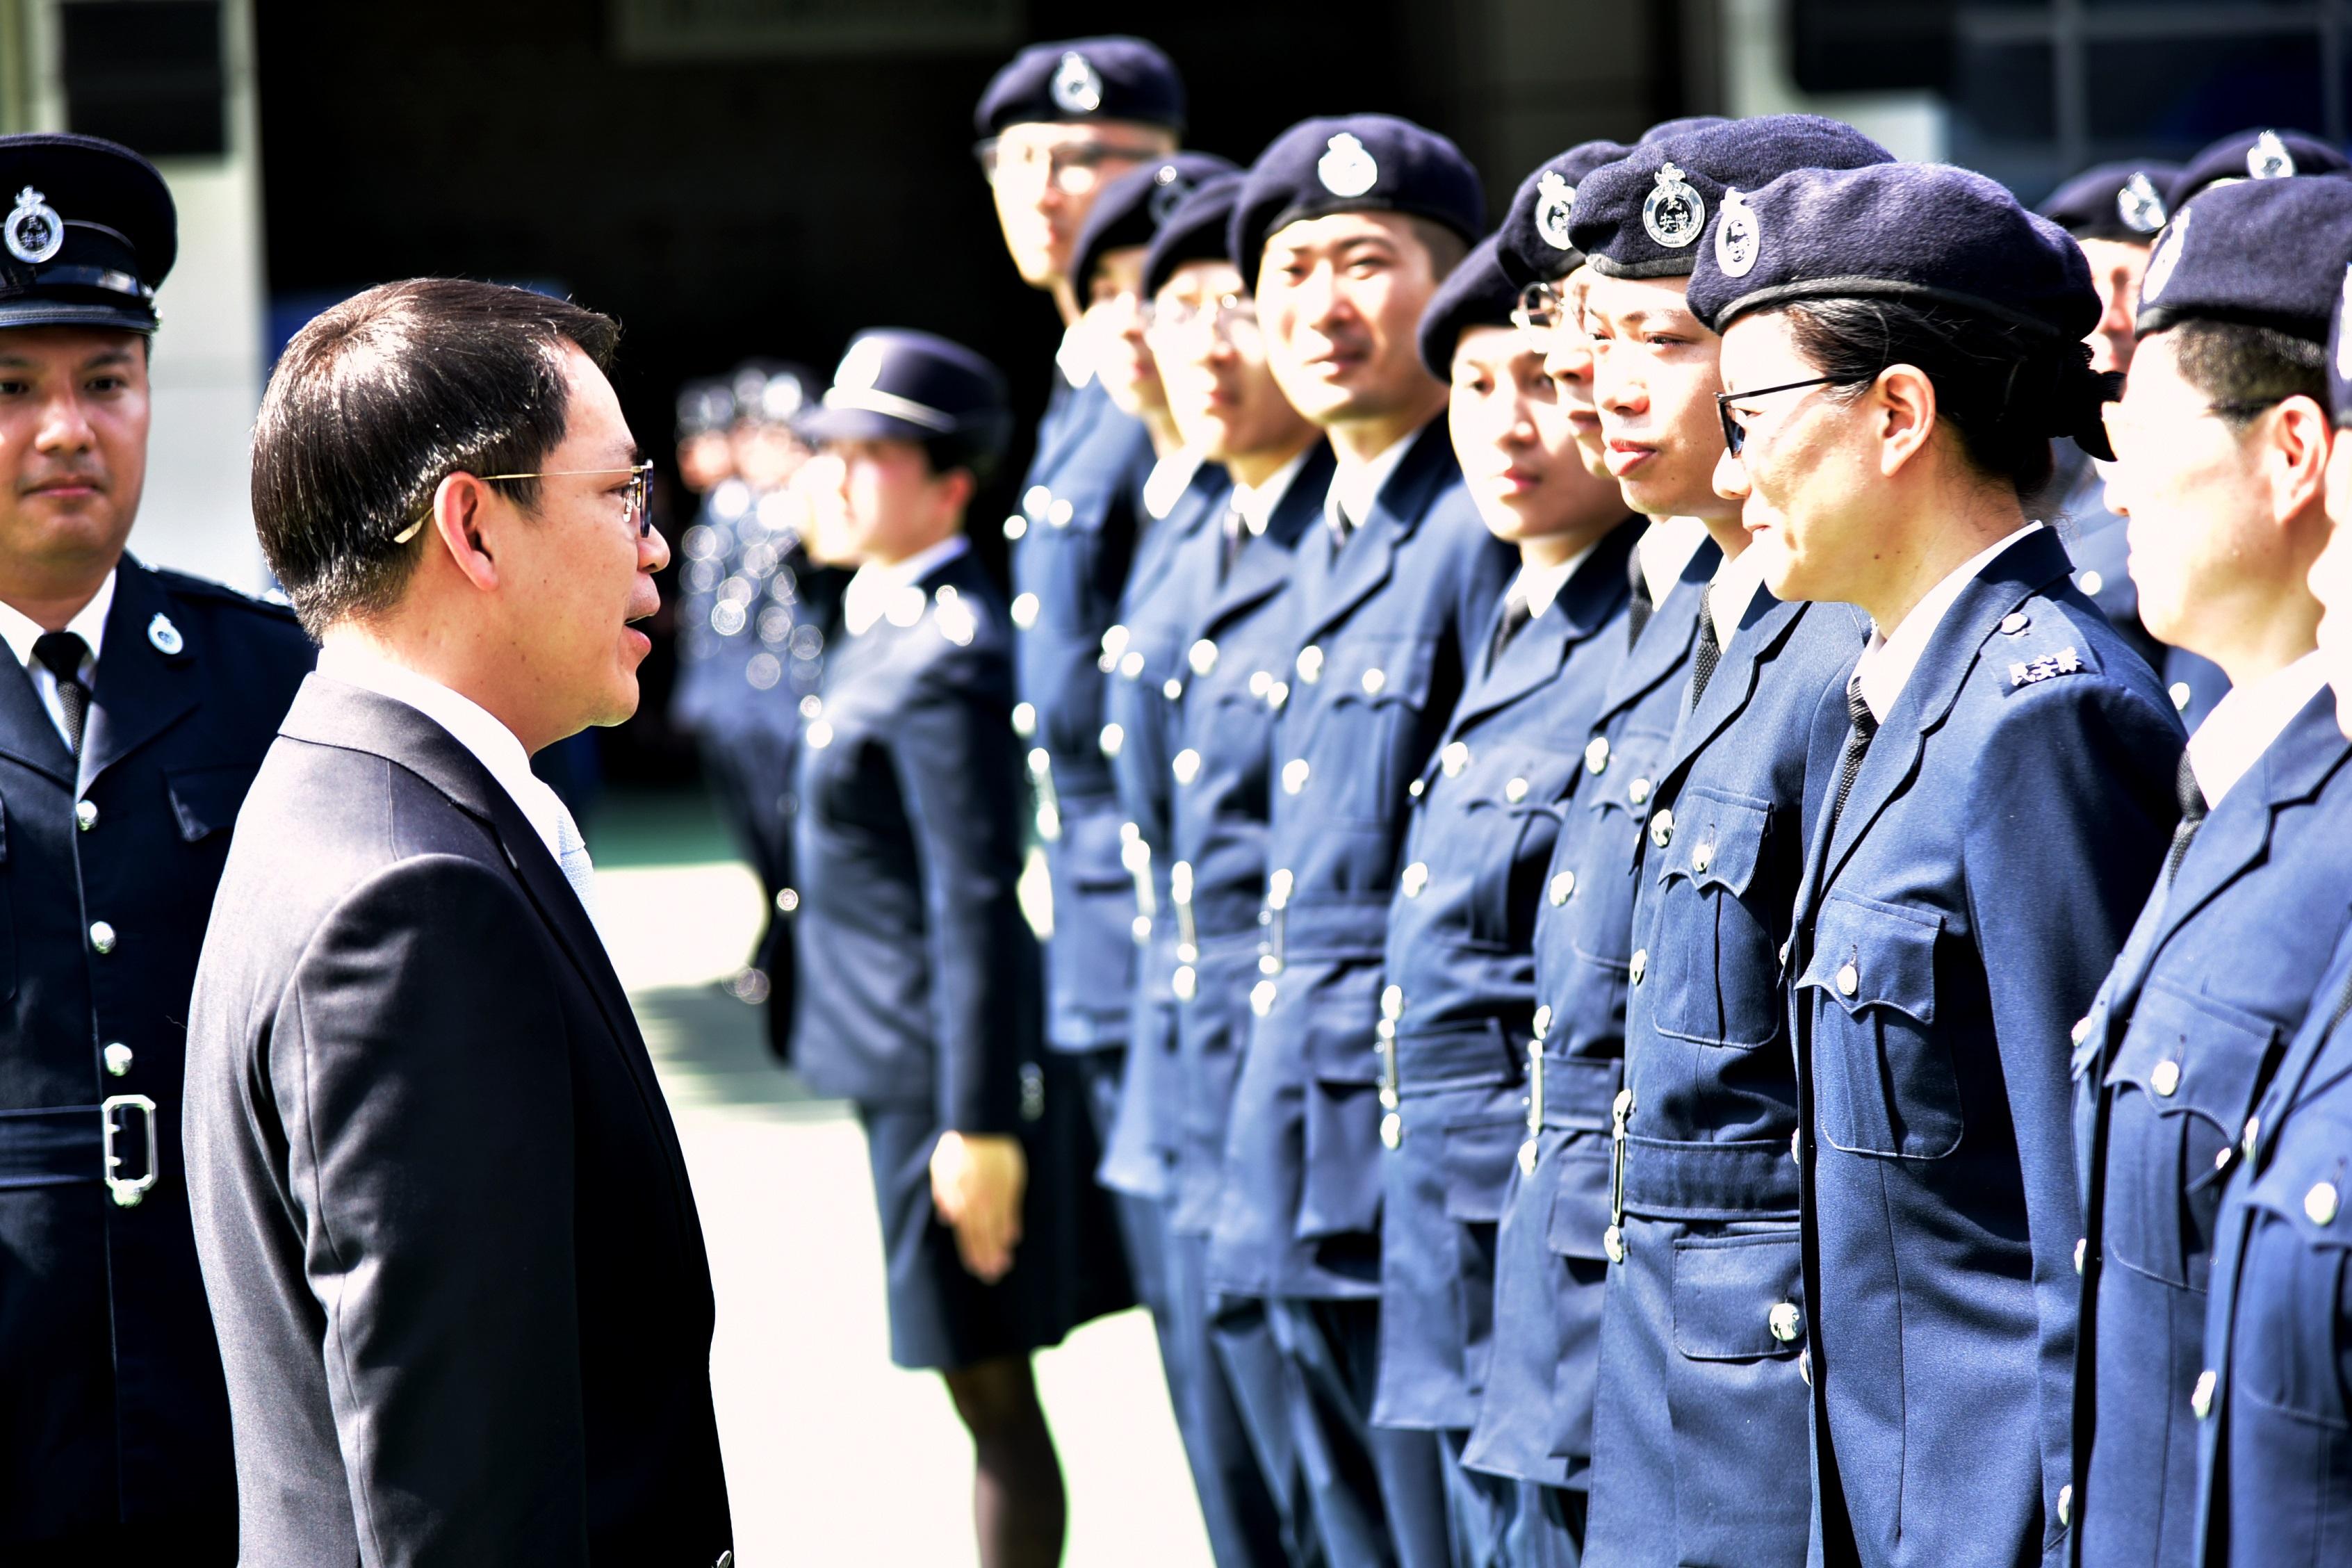 The Civil Aid Service held the 87th Recruits Passing-out Parade at its headquarters today (March 24). Photo shows Non-official Member of the Executive Council and Legislative Council Member Mr Chan Hak-kan (left) inspecting the parade.